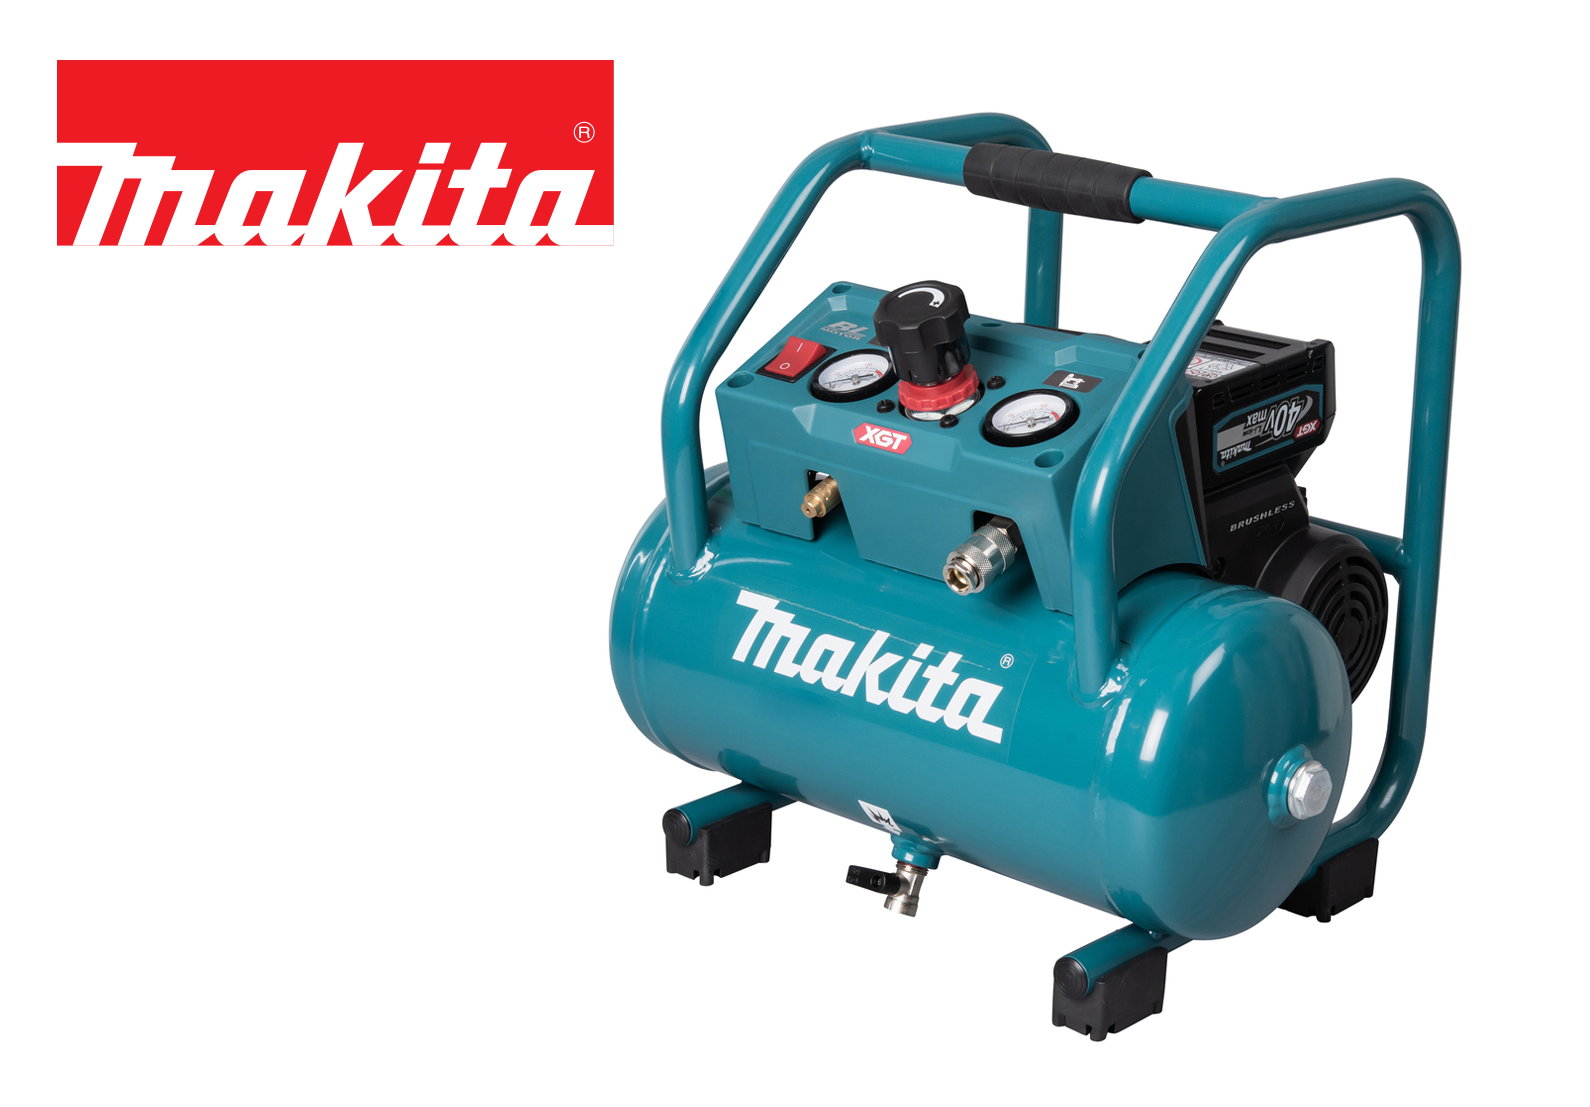 Makita launches its largest capacity battery to date